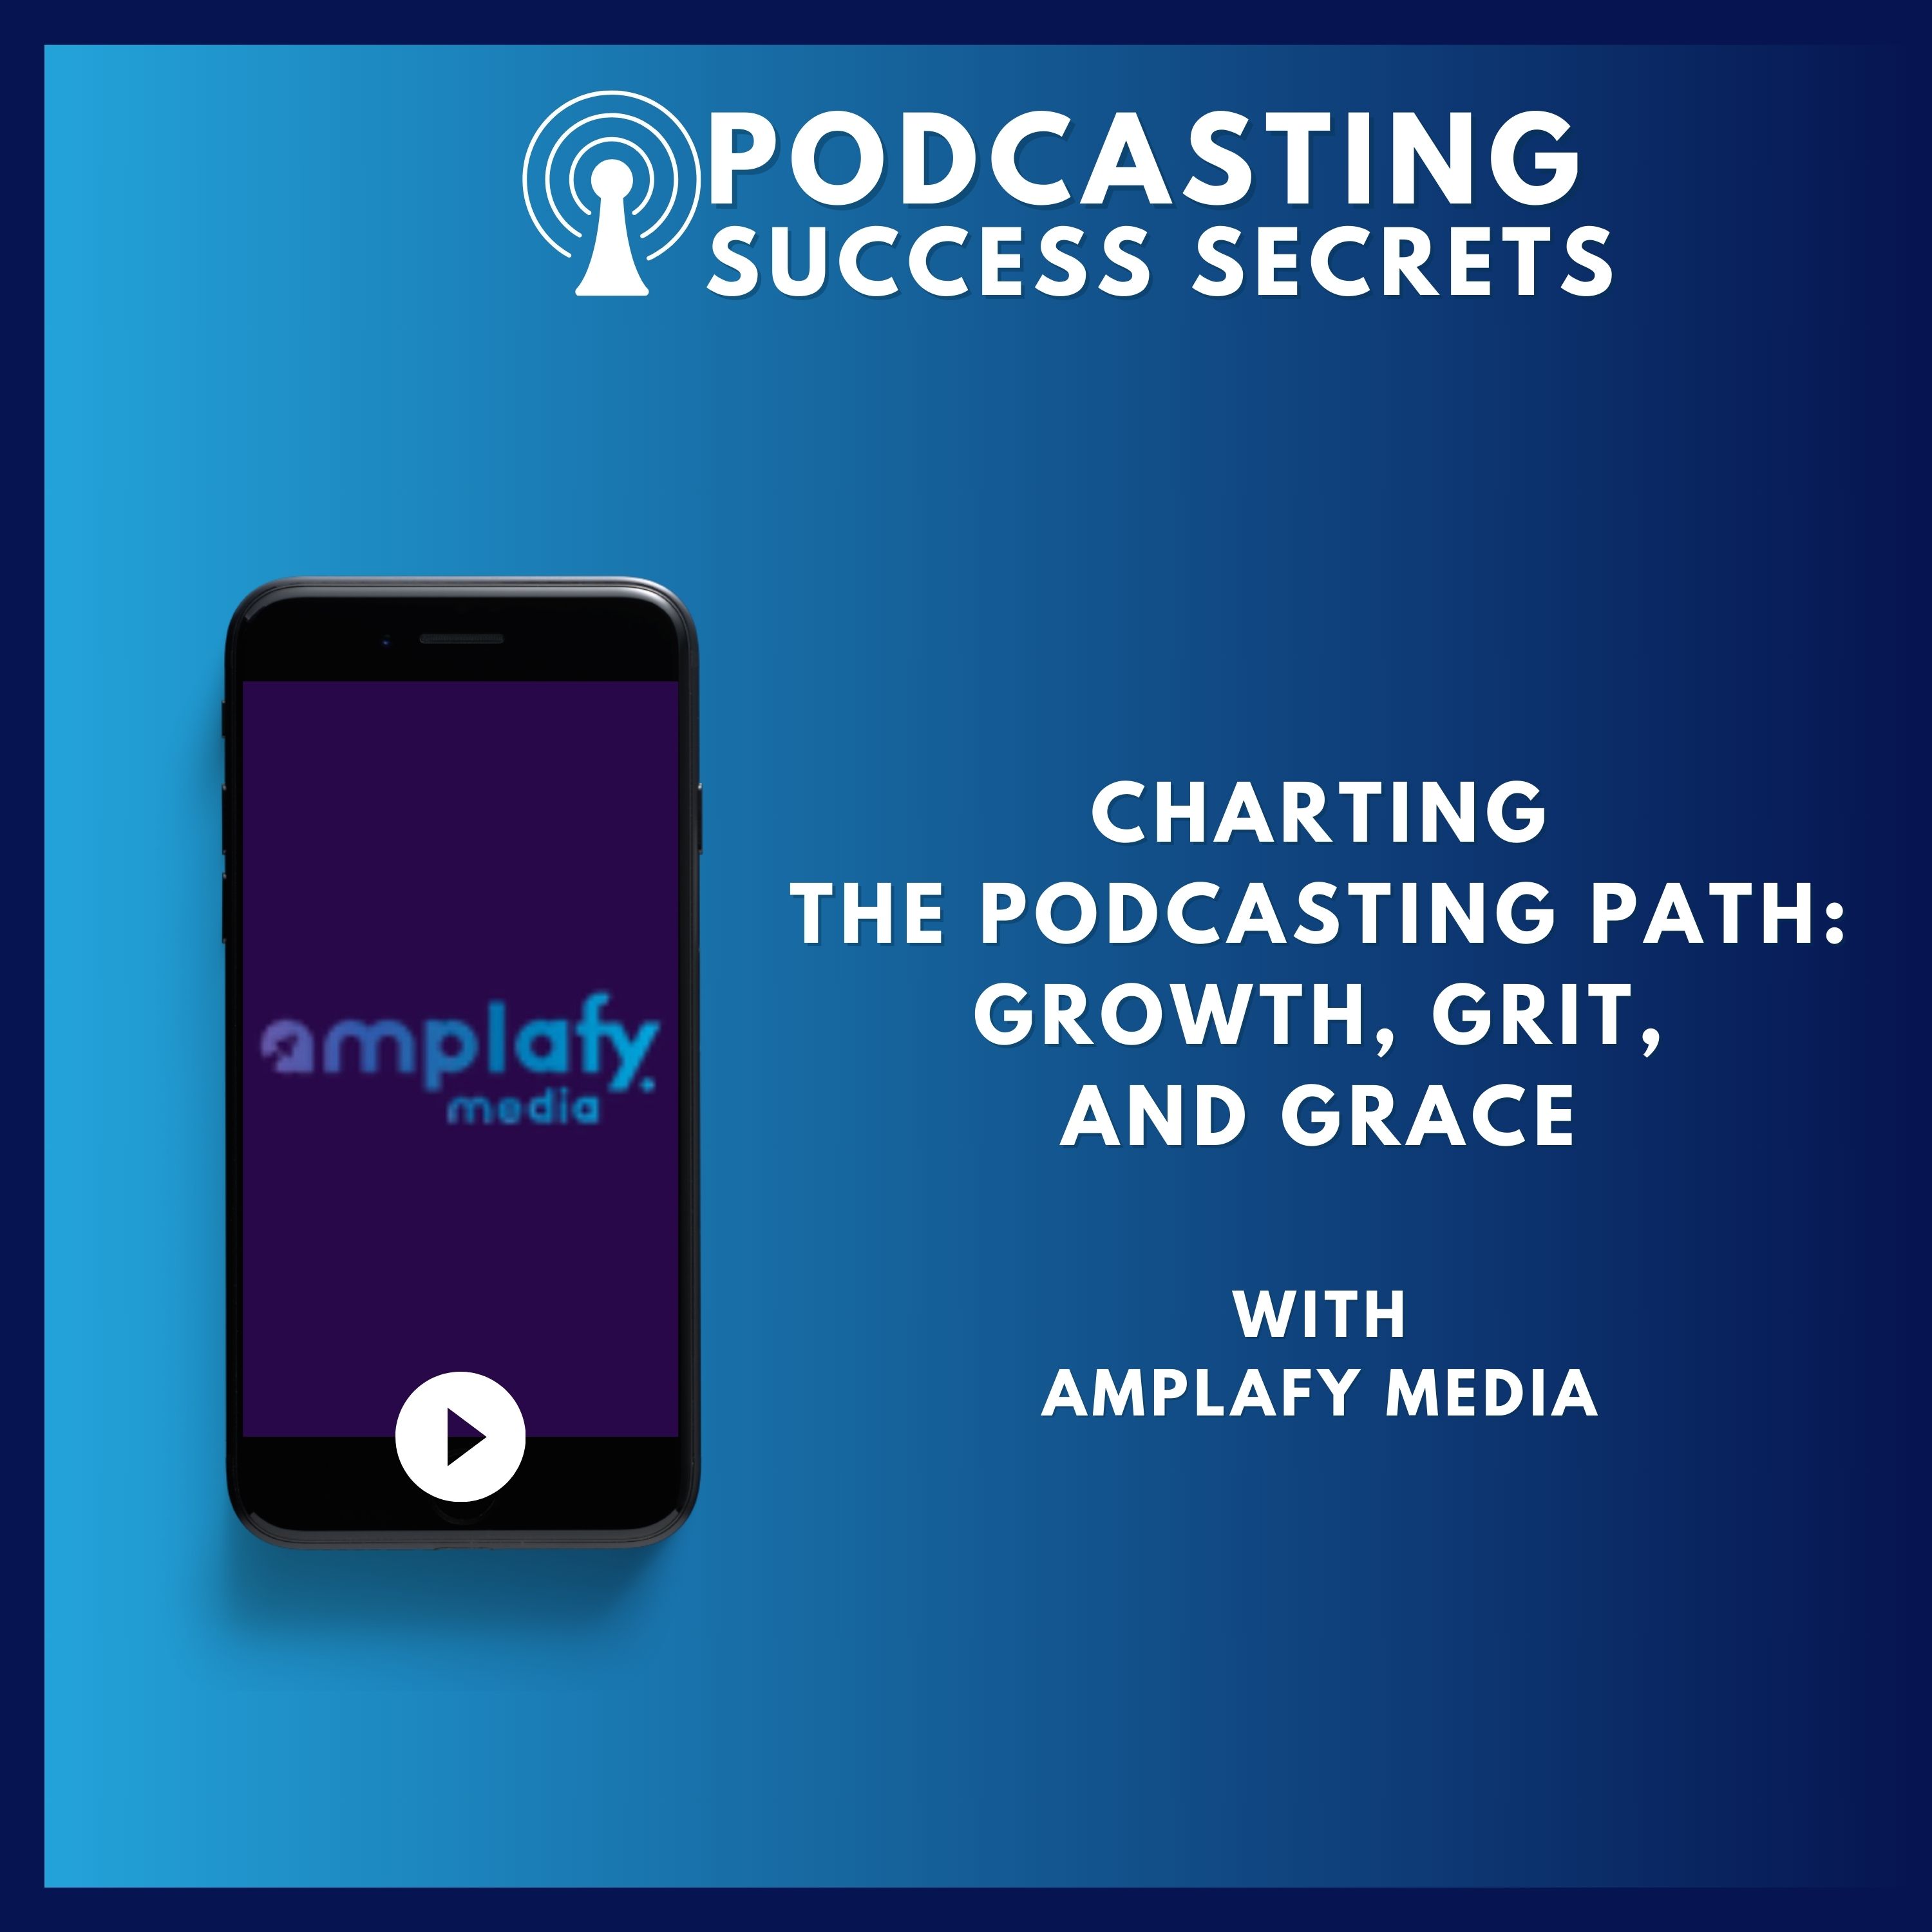 Charting the Podcasting Path: Growth, Grit, and Grace with Amplafy Media